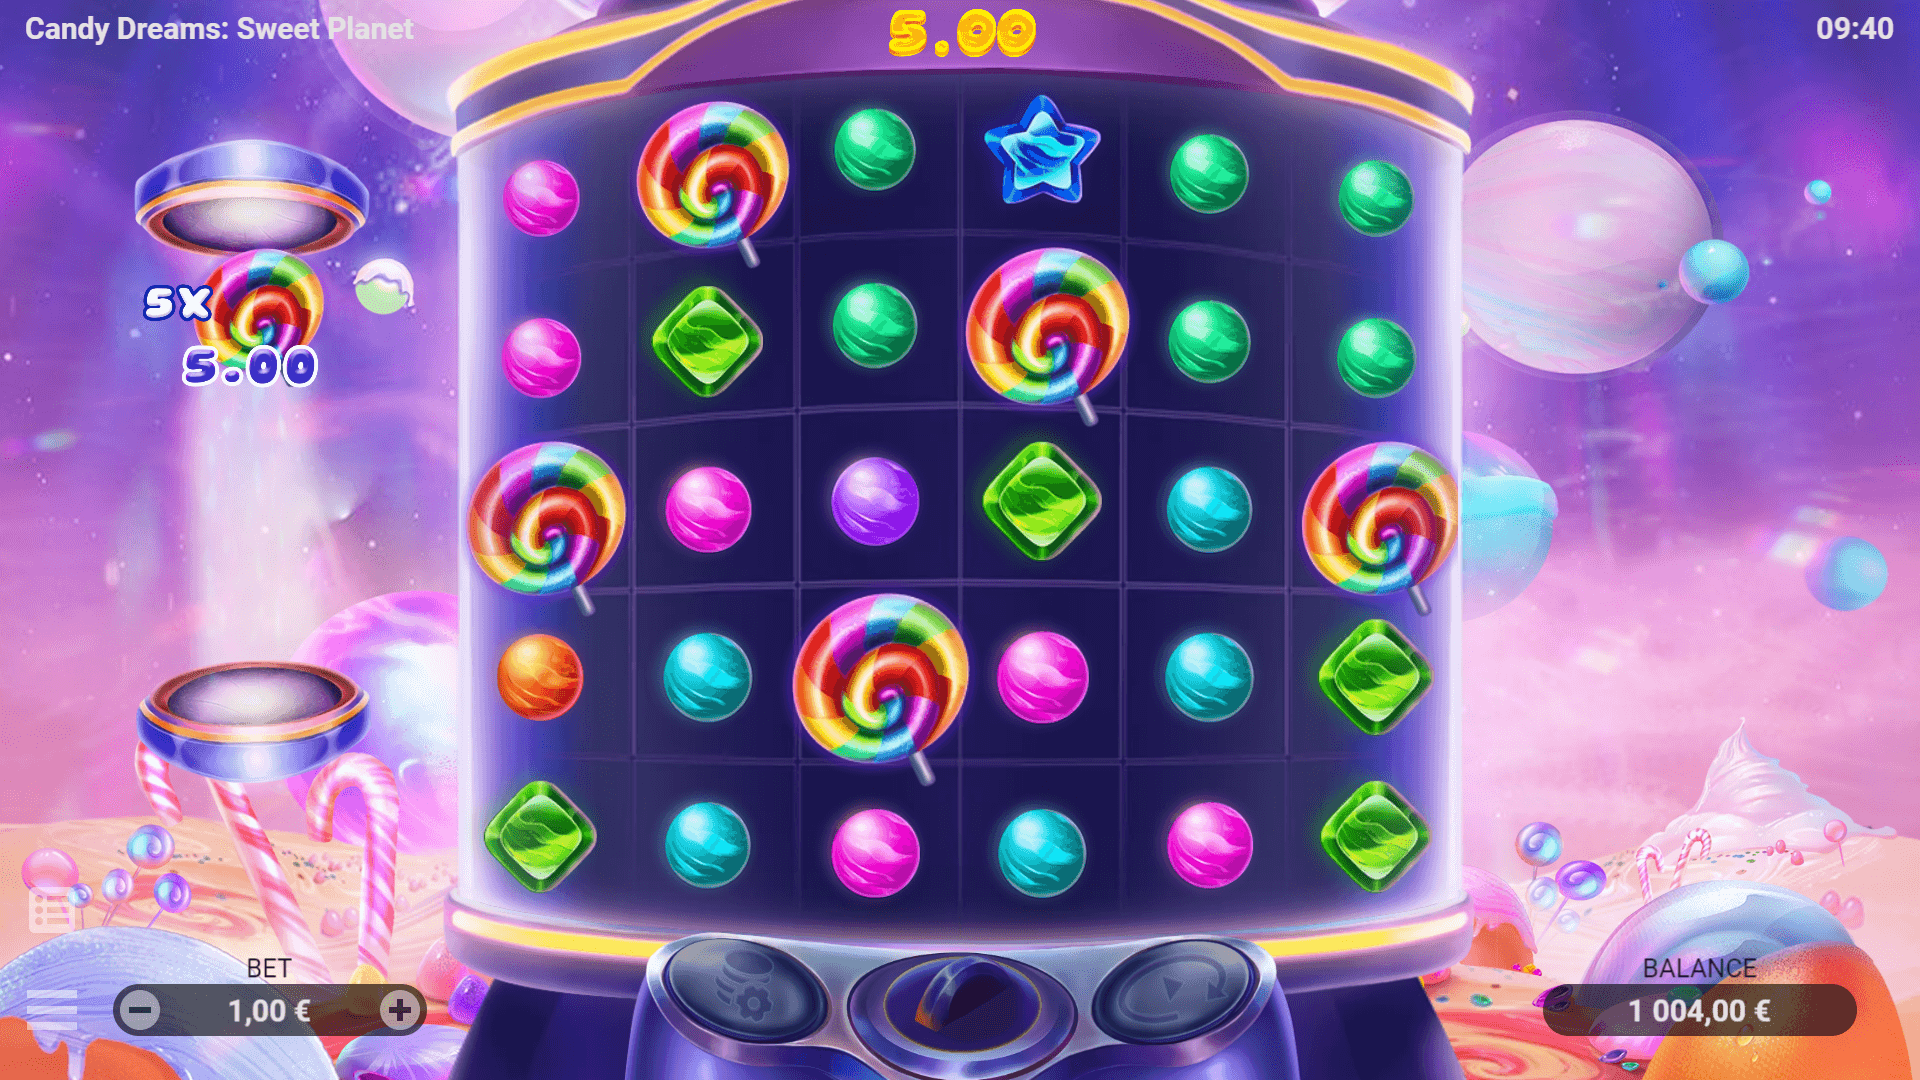 Candy Dreams Sweet Planet Evoplay Slot PG